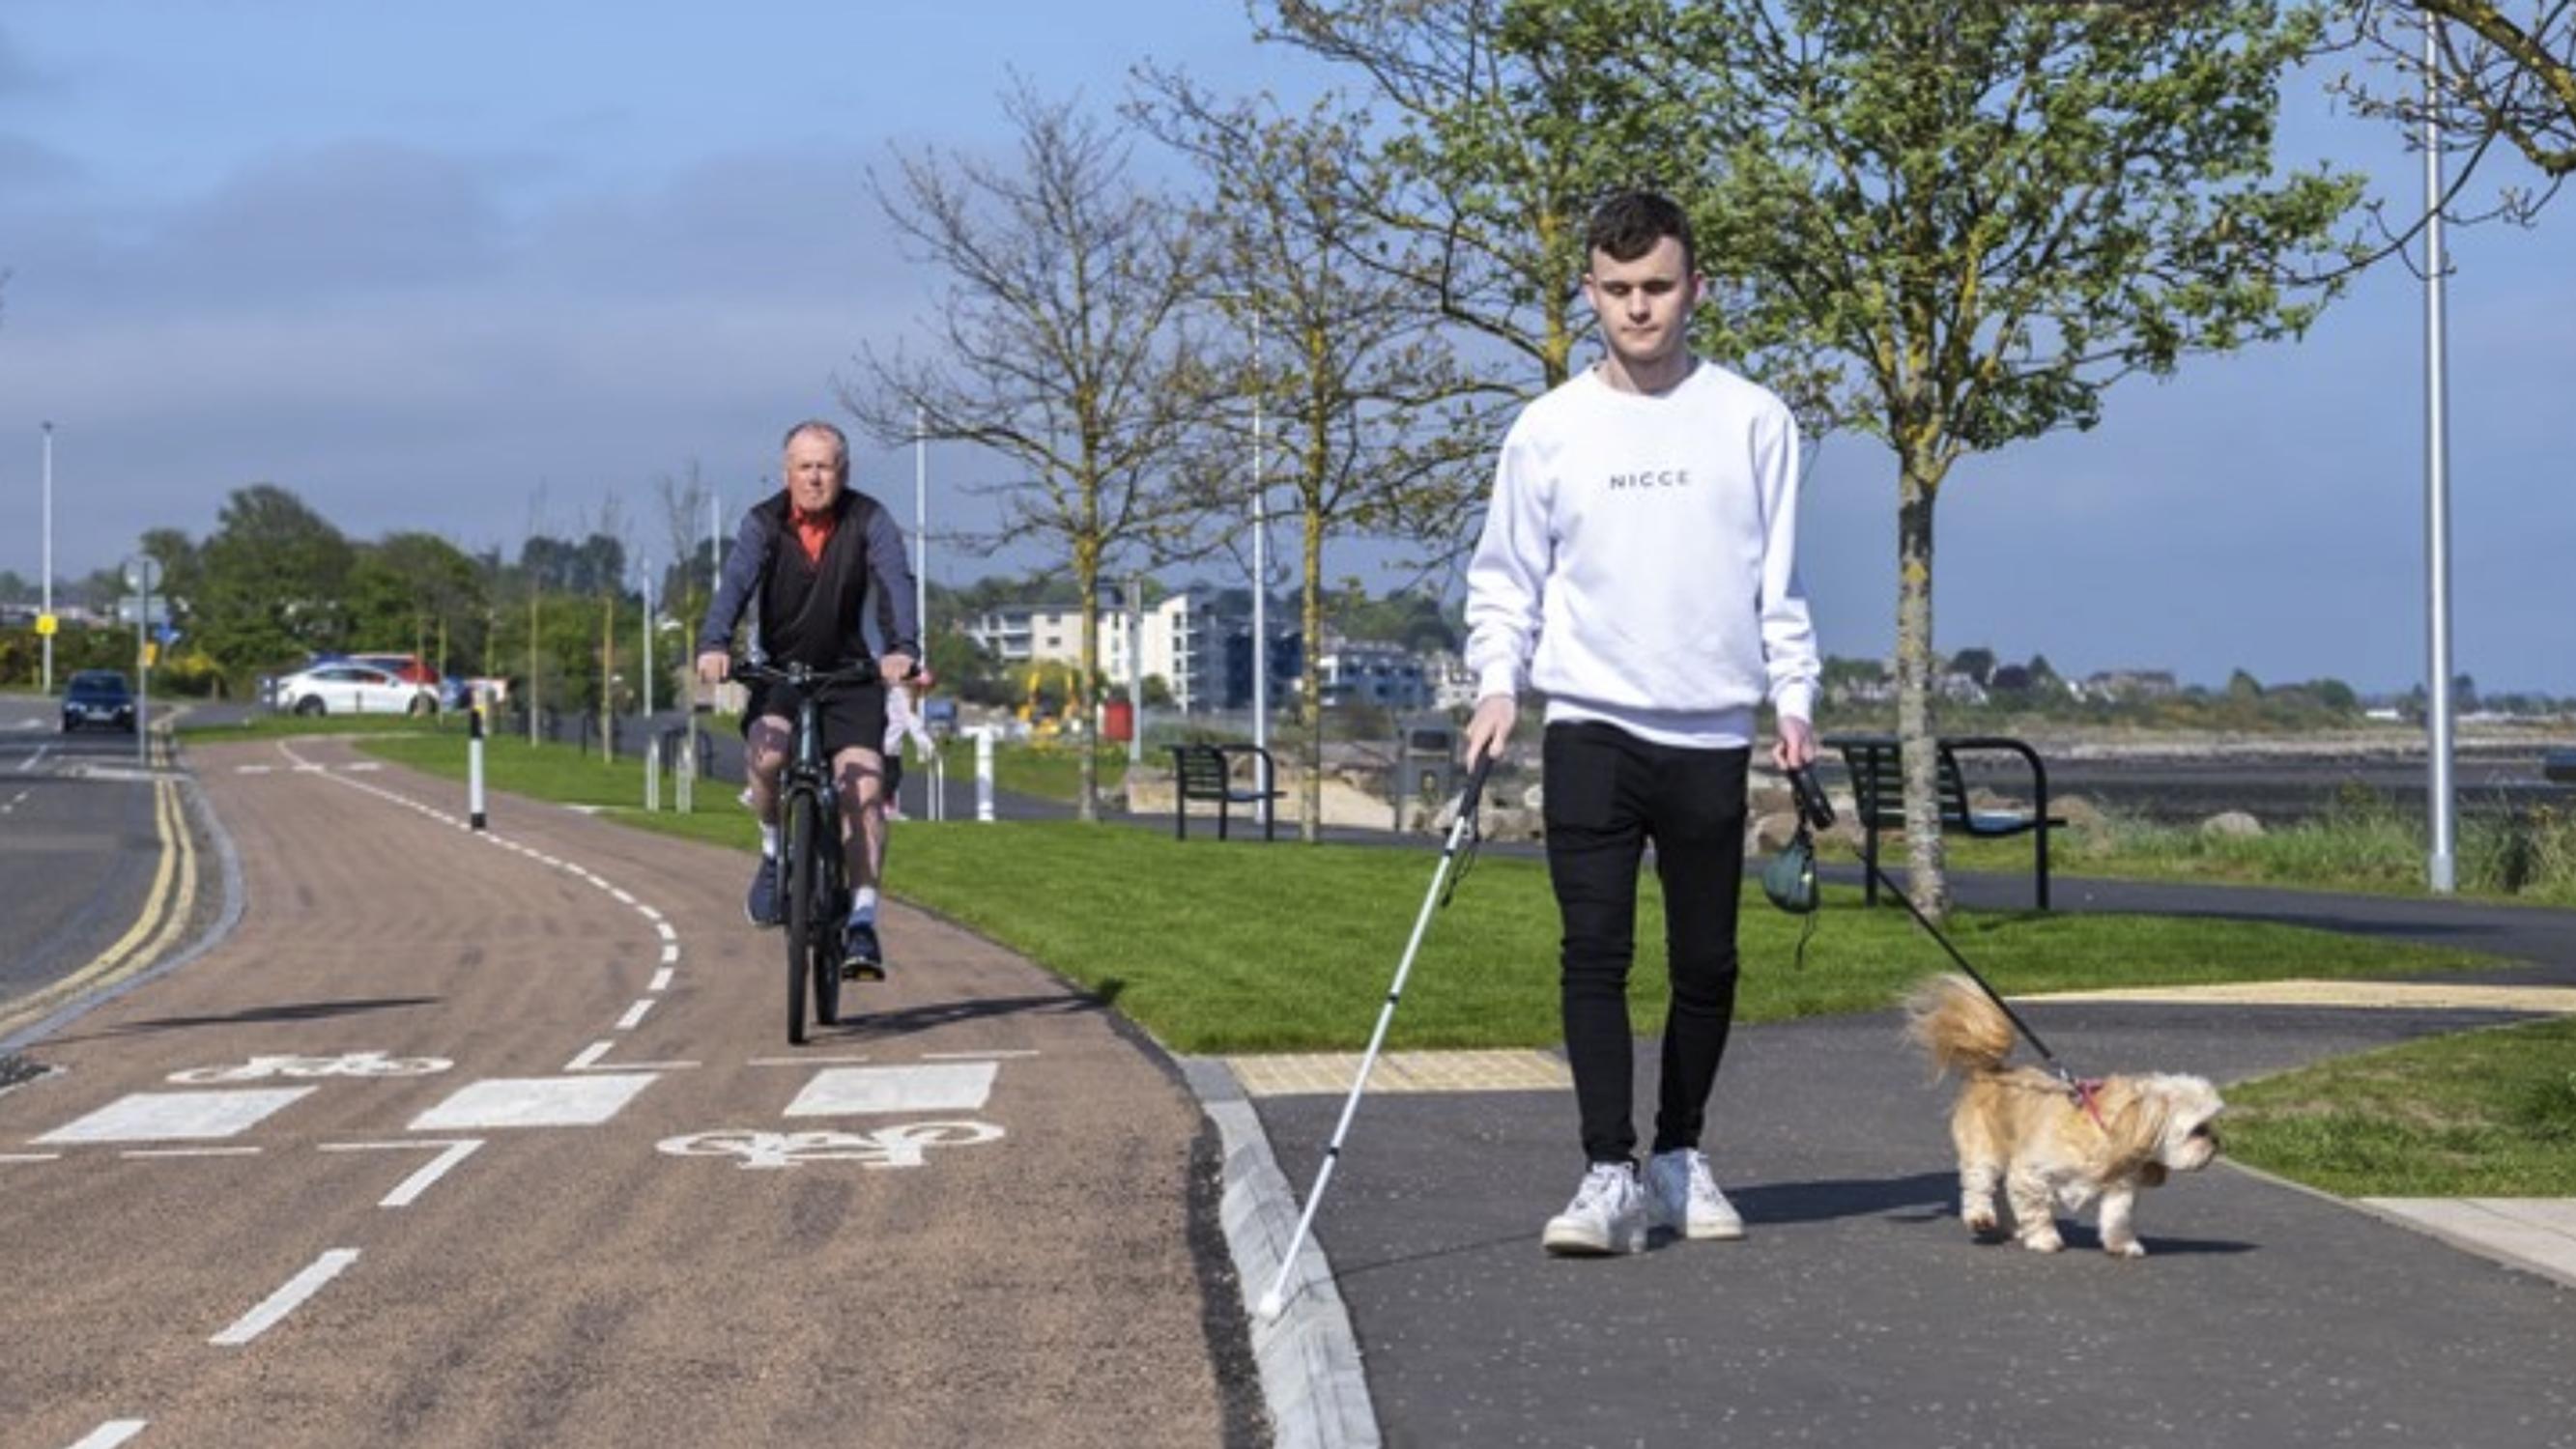 The Broughty Ferry and Monifieth route has a clear demarcation between the pavement and cycleway to ensure people can travel confidently and securely, says Sustrans